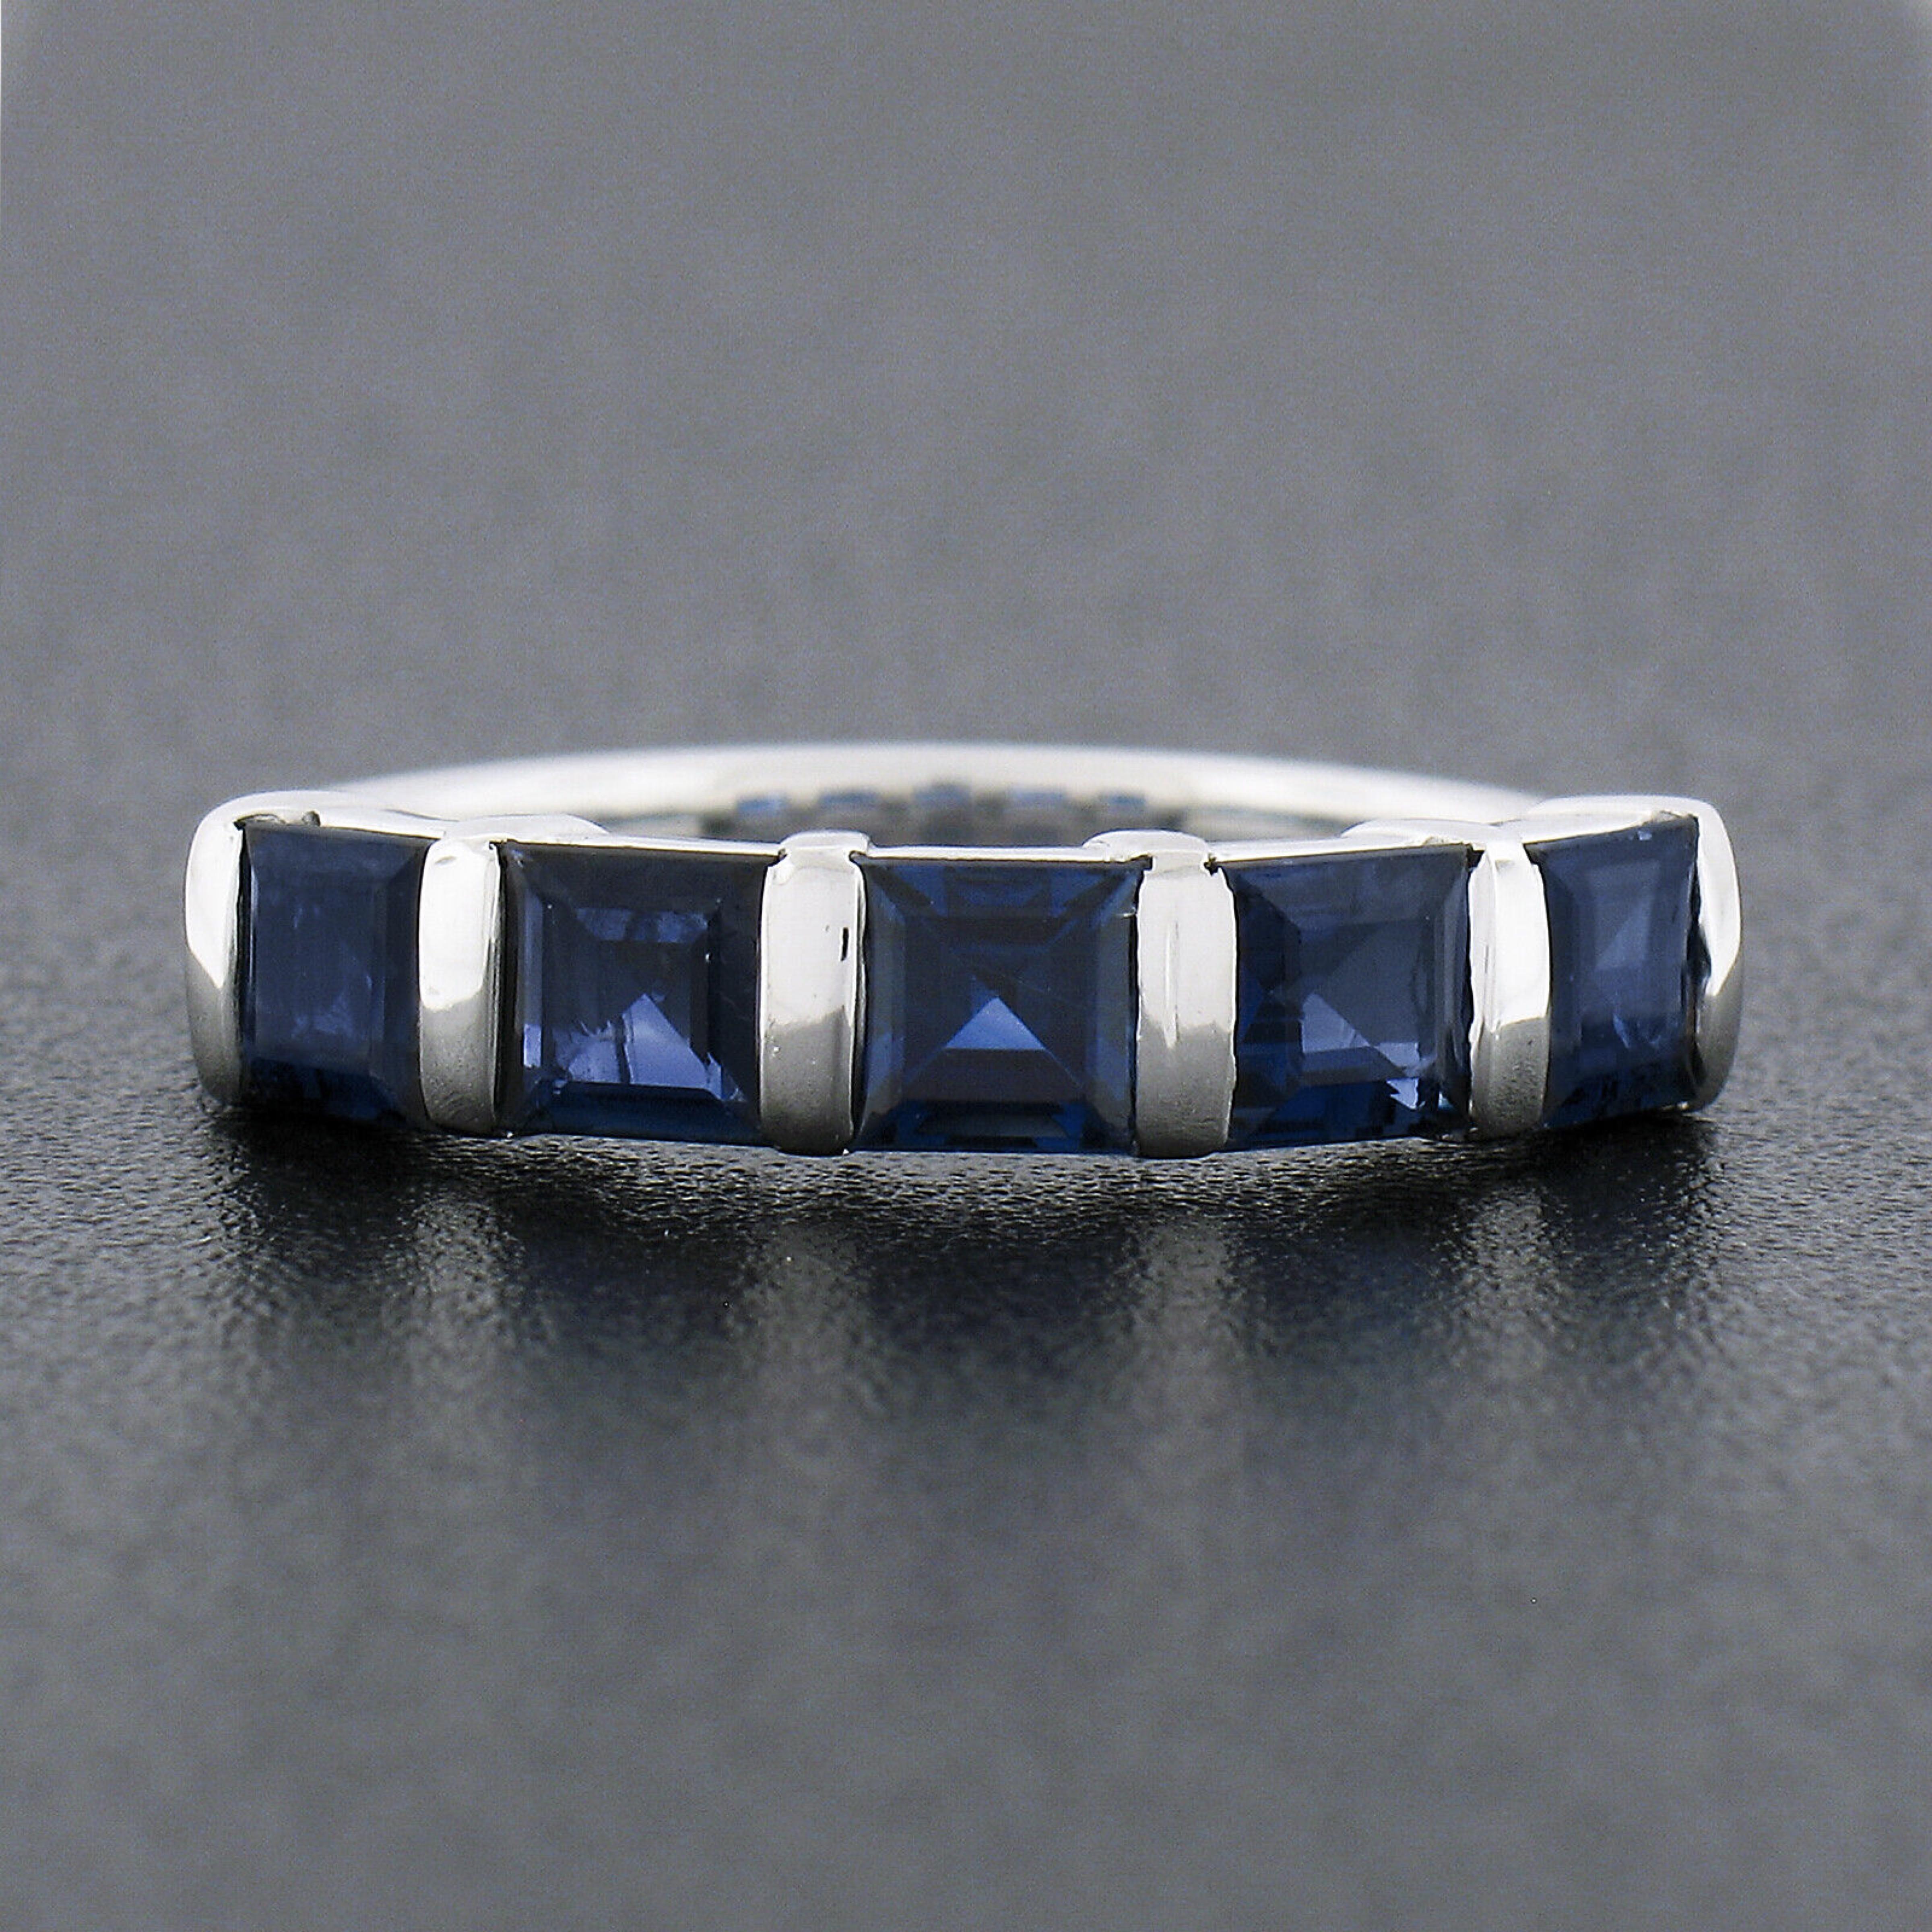 This magnificent and very well made band ring is crafted in solid platinum and features 5 genuine sapphire stones neatly bar channel set across the top. These fine sapphires are square step cut, totaling exactly 1.75 carats in weight, and are well